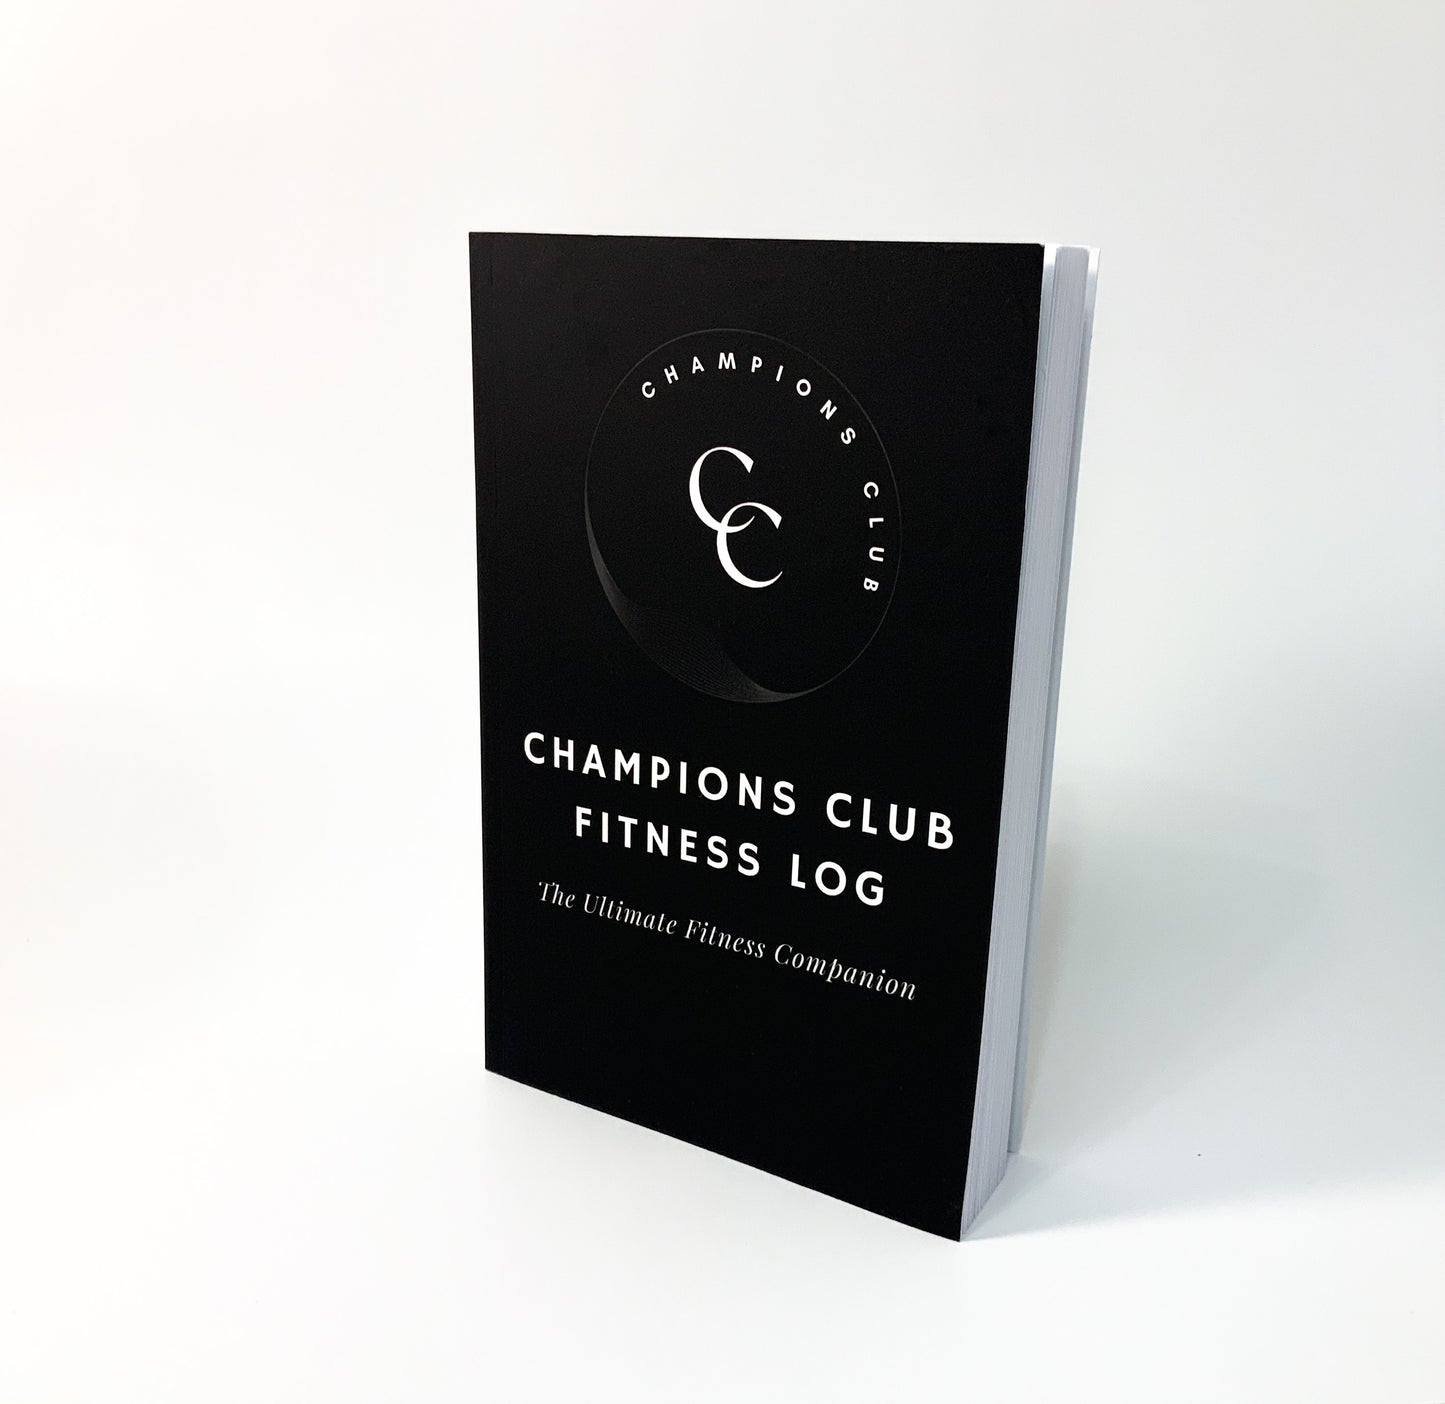 Champions Club Fitness Log: The Ultimate Fitness Companion